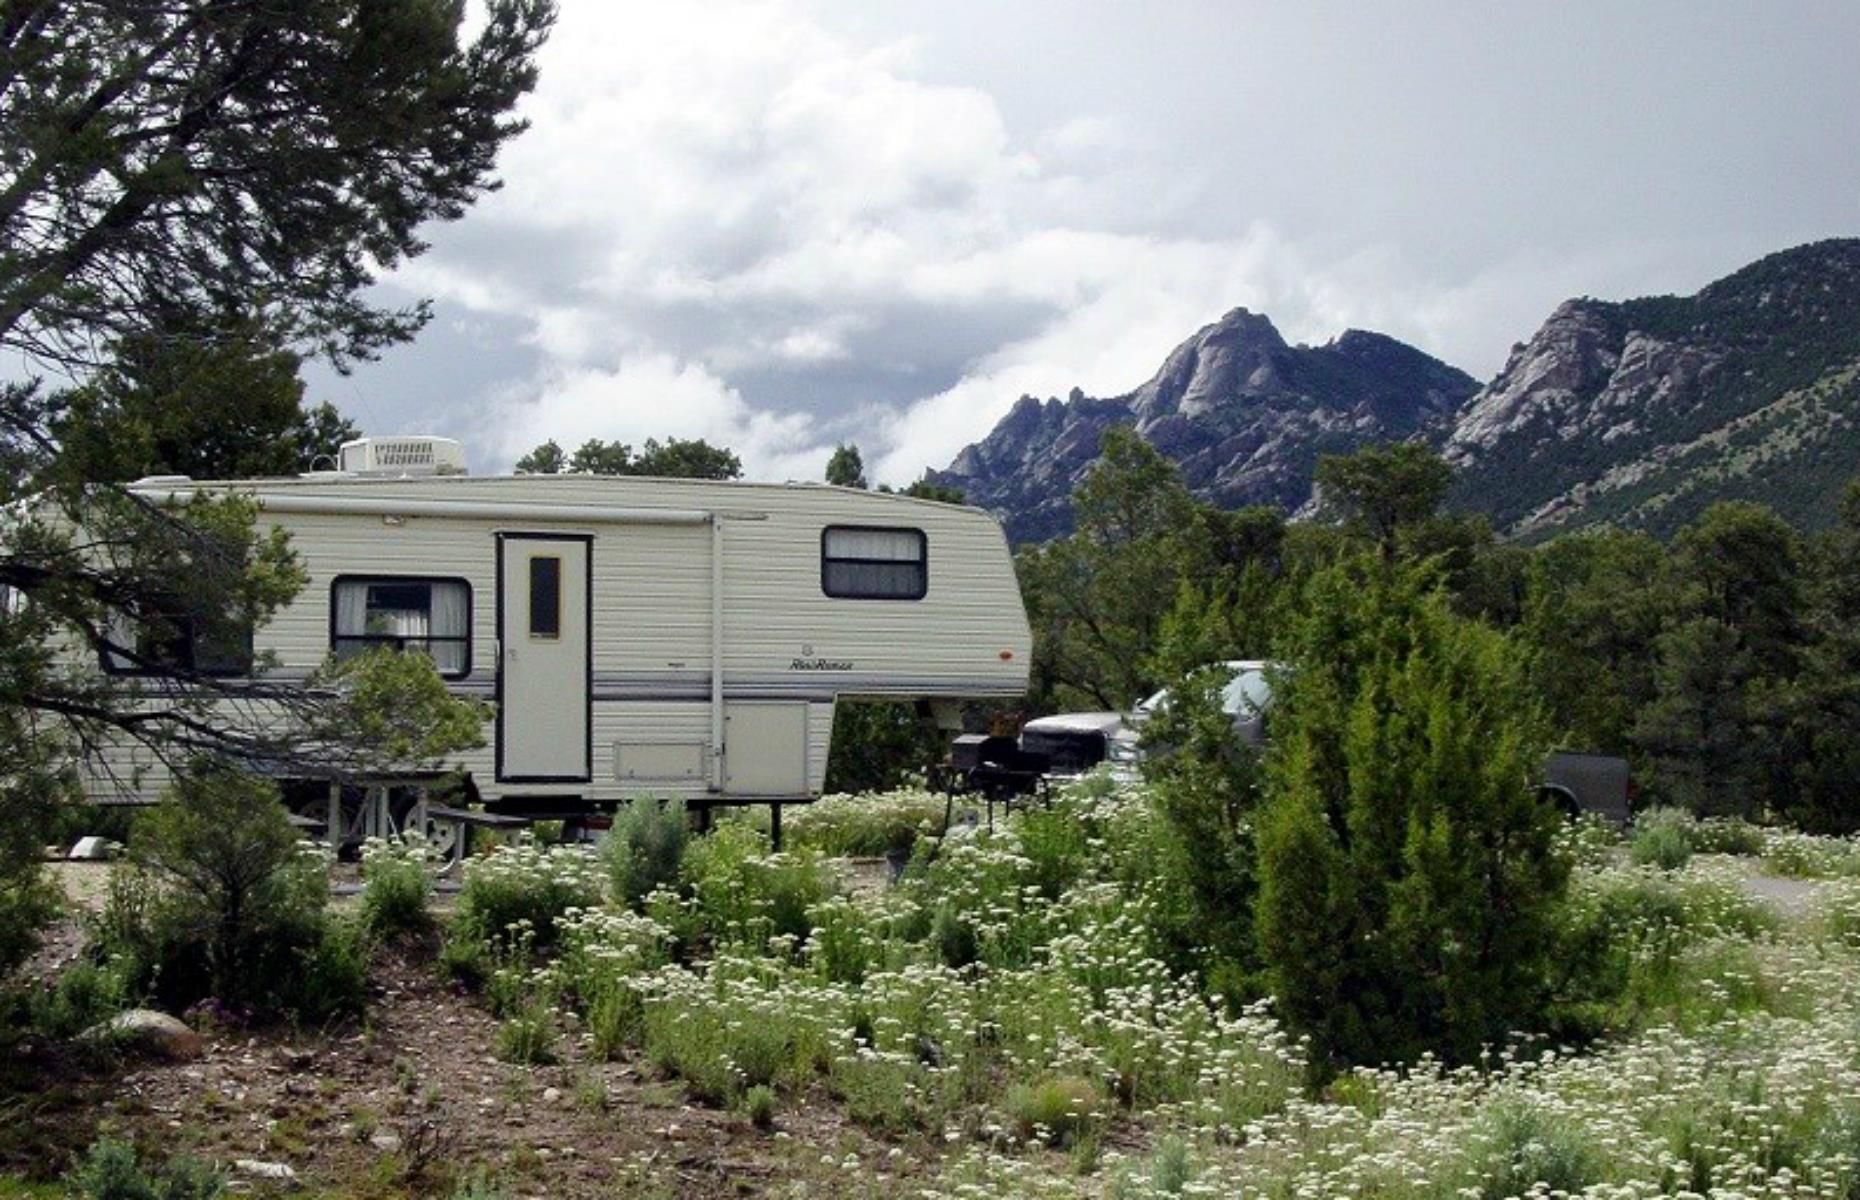 <p><a href="https://www.nps.gov/ciro/planyourvisit/smoky-mountain-campground.htm">This campground in Castle Rocks State Park</a> is just outside the entrance to City of Rocks and is ideal for those who want to stay longer than a few hours. There are 31 RV sites with electric hook-ups, water, picnic tables and a dump station, but those are mere details. It’s the setting, with spots surrounded by pine-studded meadows and backed by those ethereal mountains, that makes this a truly epic place to park up for the night. Check out <a href="https://www.loveexploring.com/galleries/86628/jawdropping-photos-of-america-from-above">jaw-dropping photos of America from above here</a>.</p>